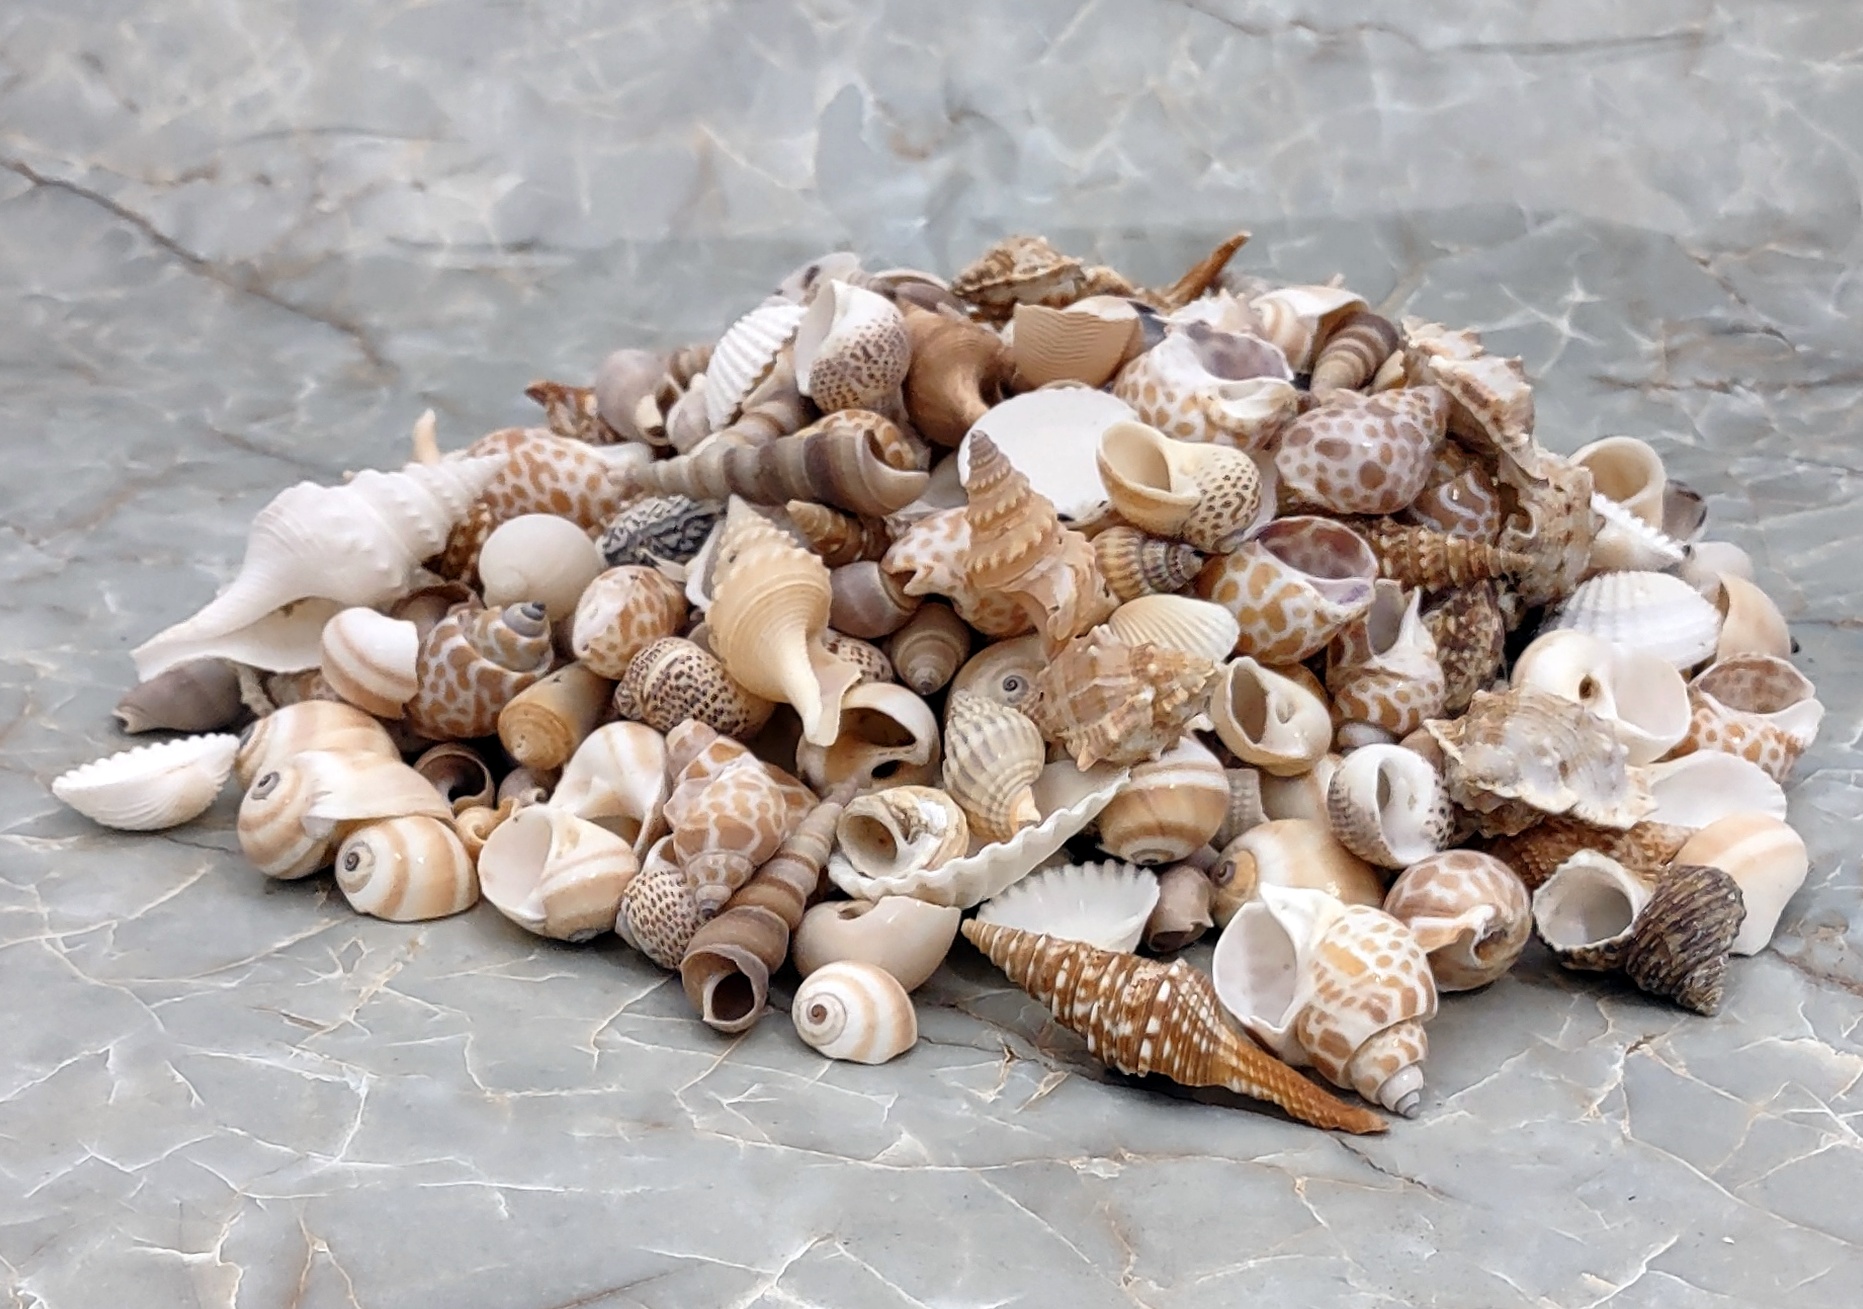 Large Seashell Assorted Ocean Bulk Mix (approx. 1 Kilogram or 2.2 lbs. 1-4  inches) Bulk Shell Mix for display, arts, crafts & collecting!